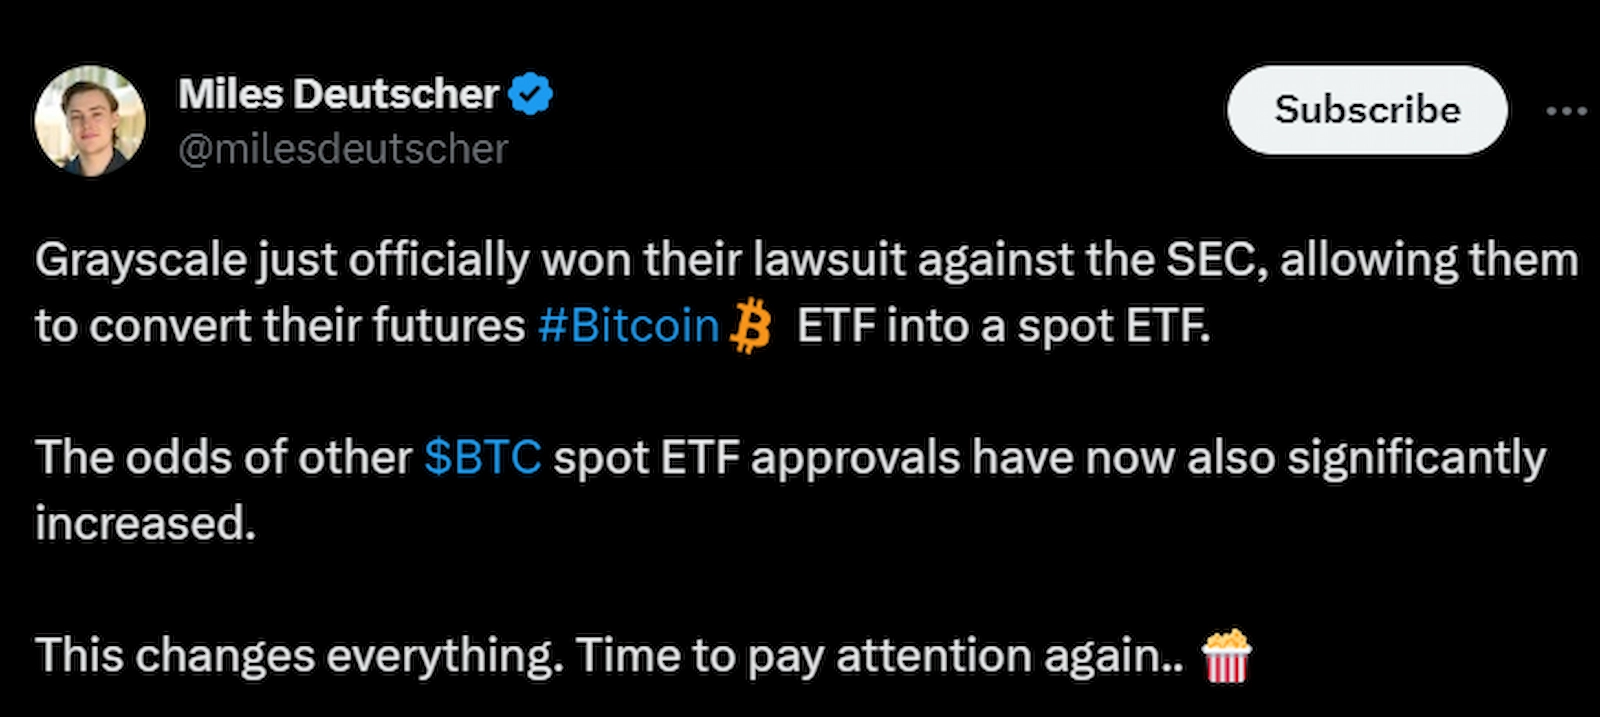 Several crypto users started celebrating the possibility of a Bitcoin ETF soon.